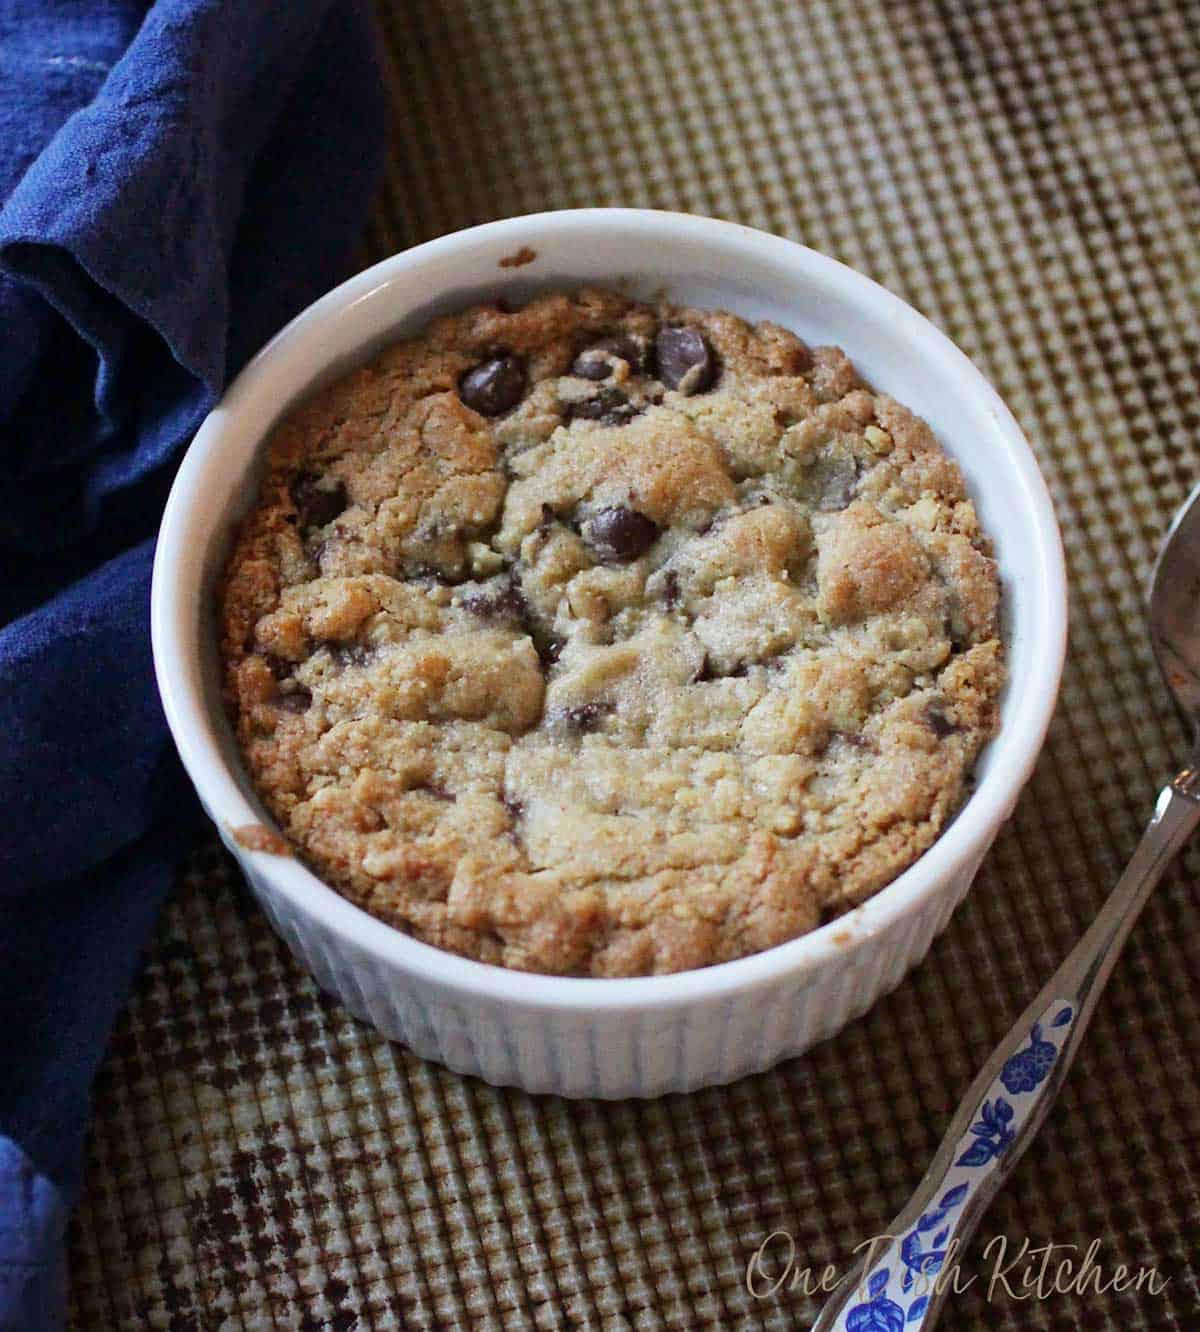 An overhead view of a single chocolate chip cookie on a baking sheet next to a spoon.